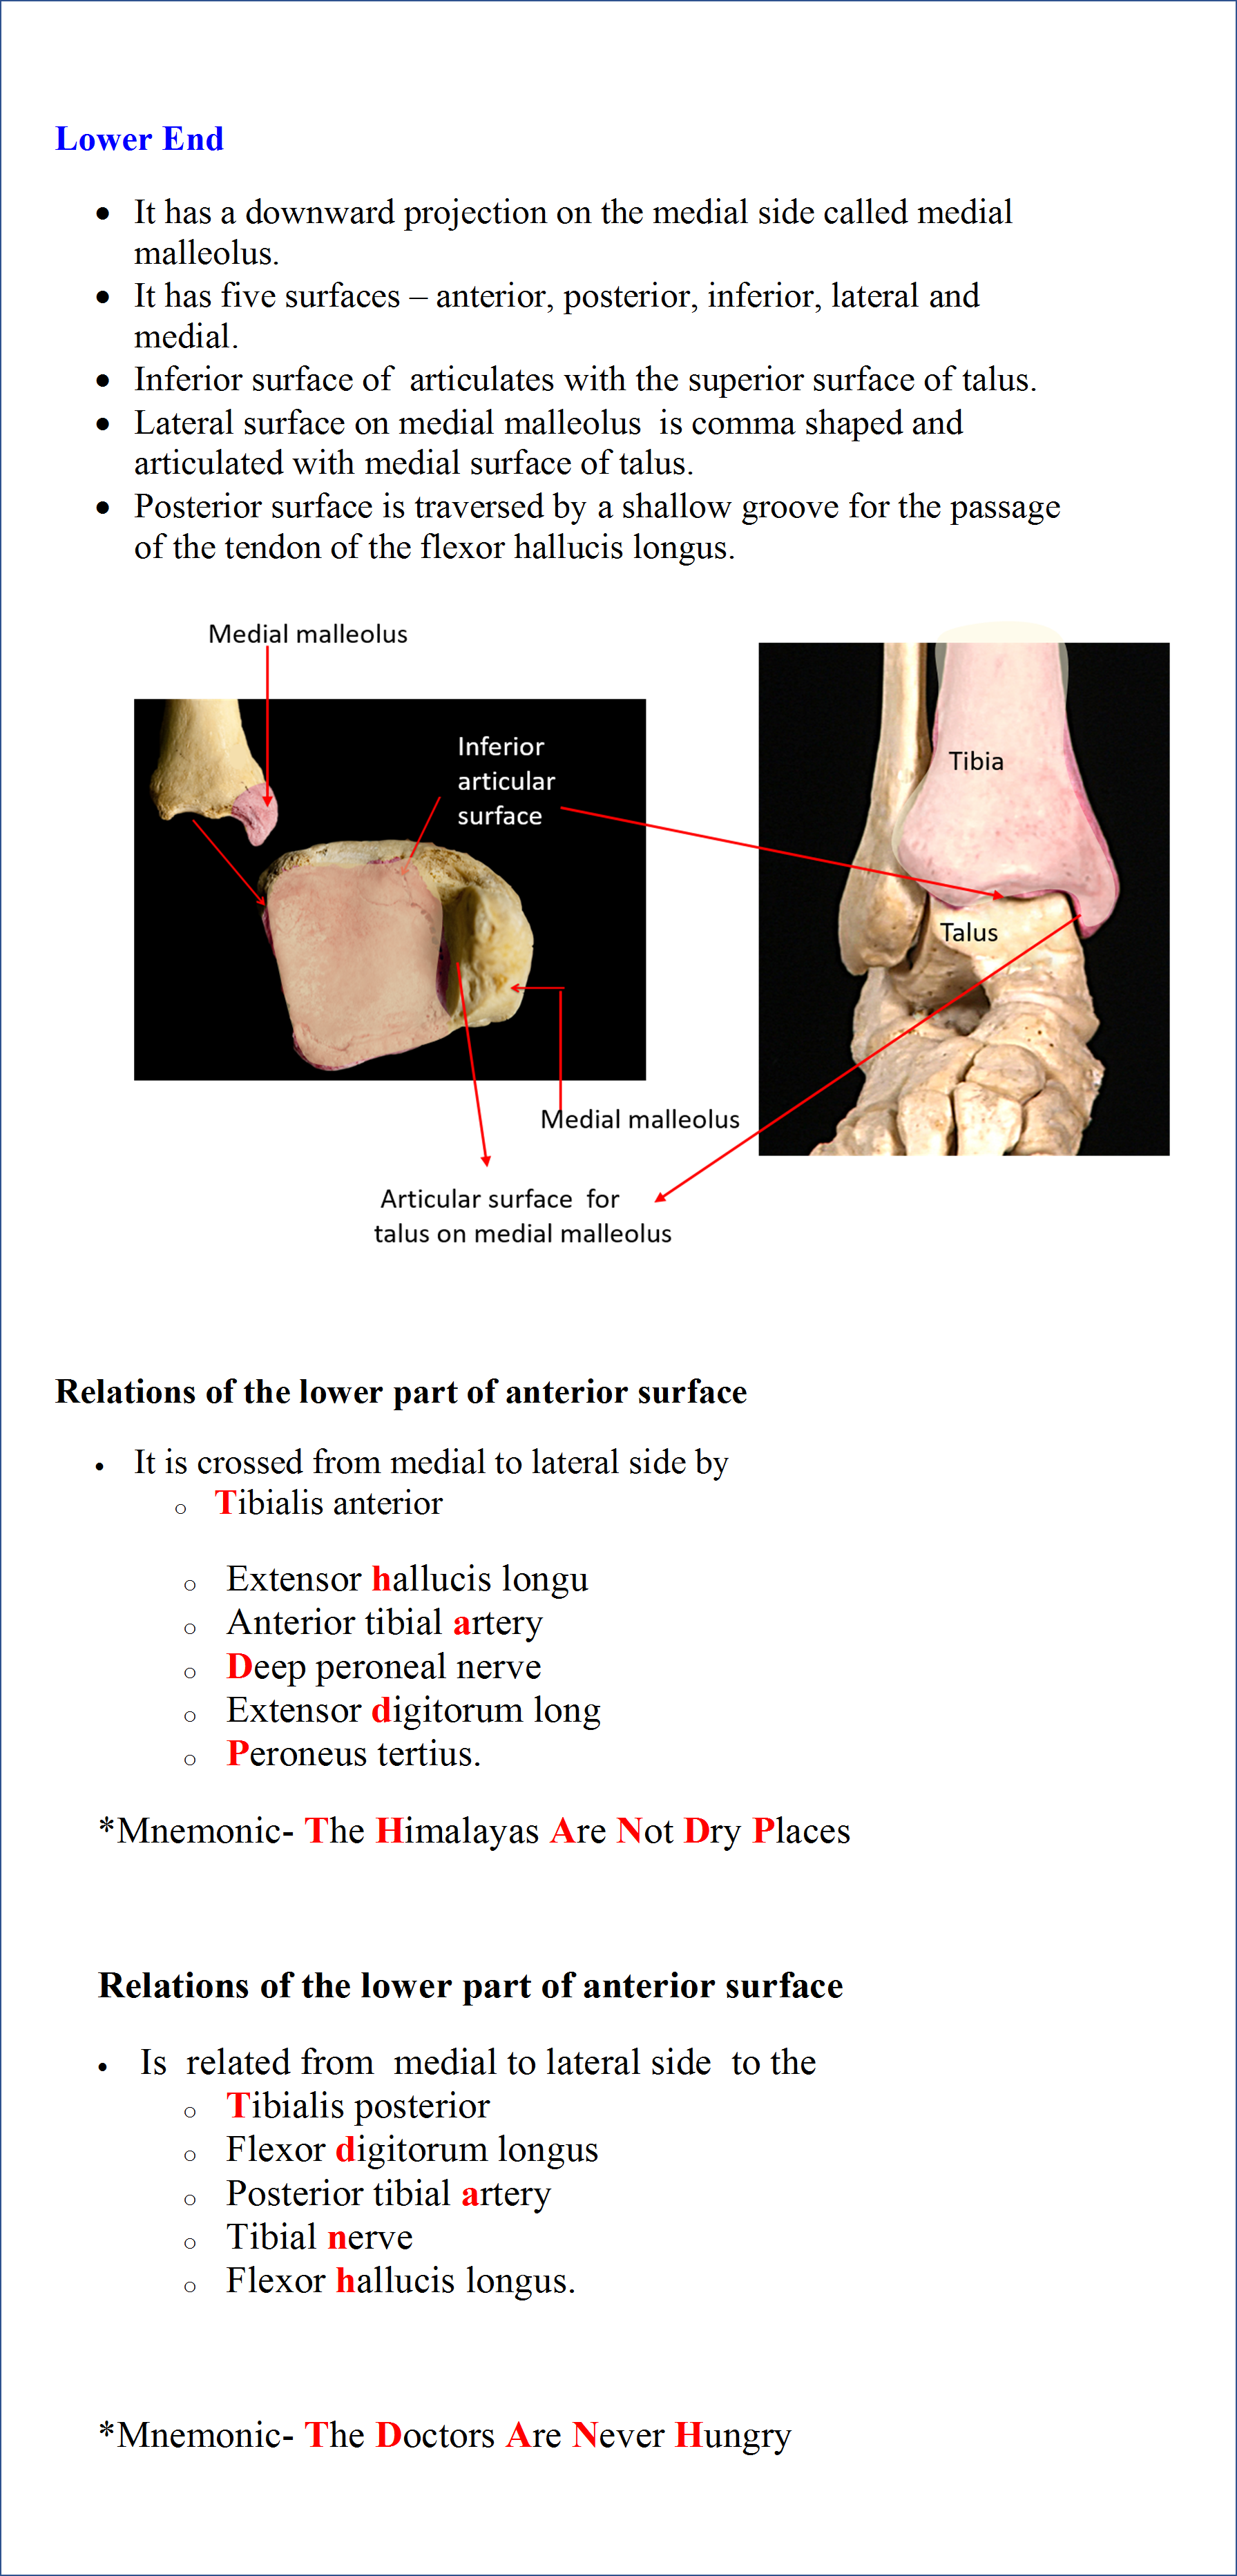 Lower End of Tibia